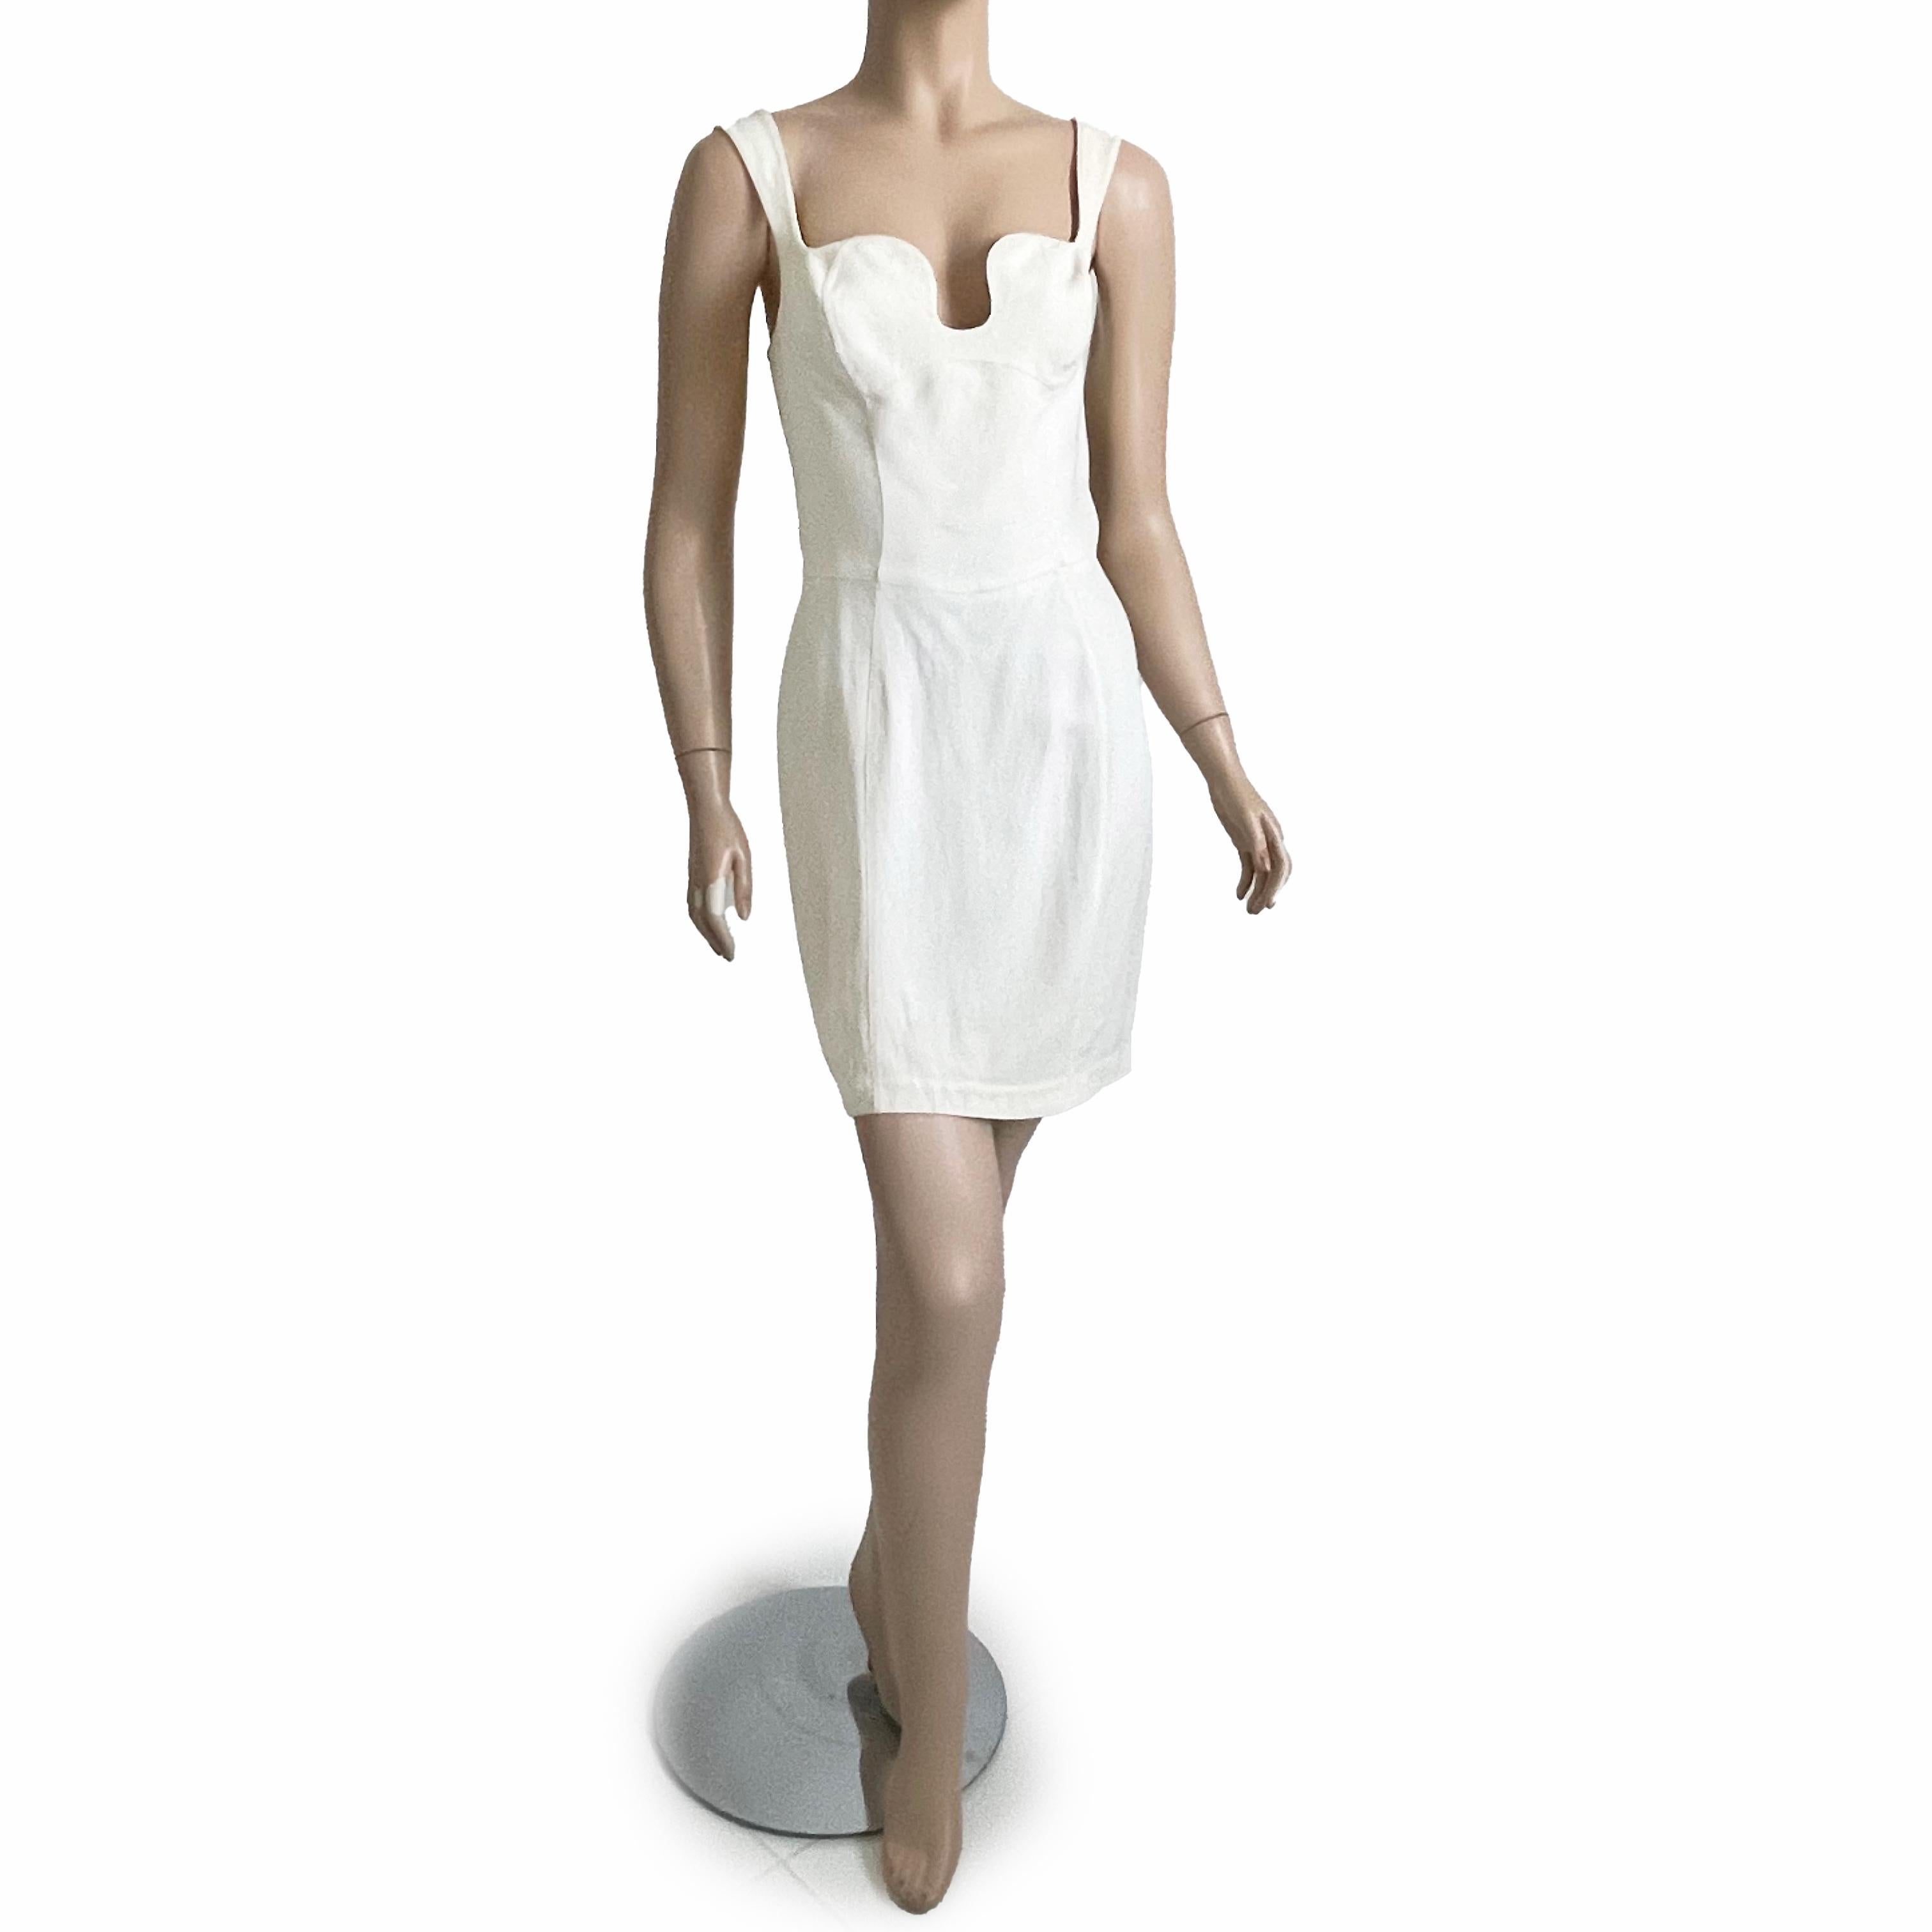 We love this Thierry Mugler crepe fabric cocktail dress! Made from a white crepe fabric, it features a sculptural bodice and a tulip-shaped skirt!

Fabulous and chic, it's perfect for the warmer months and is so easy to wear and style! Pair it with